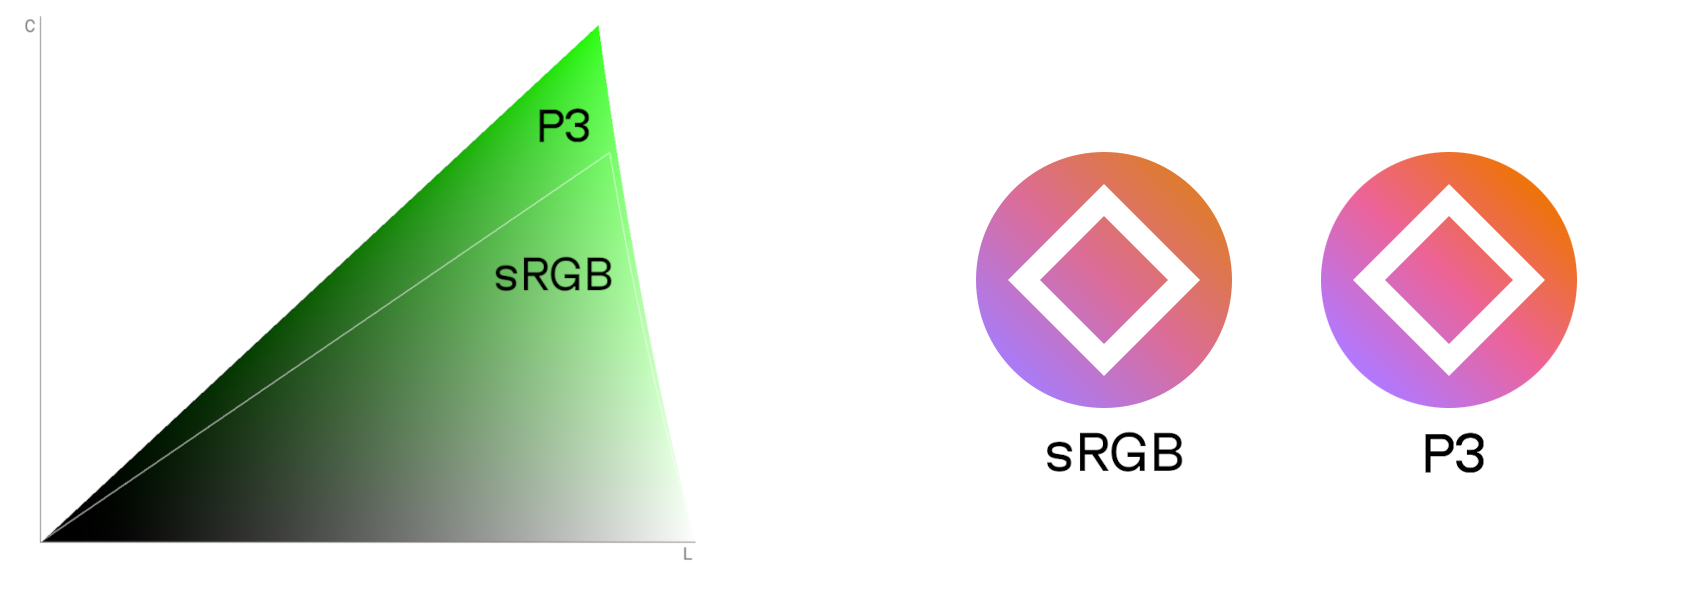 On the left, a shape shows the extra colors P3 colors gives us from sRGB, represented as an extended wedge from the original shape. On the right, an icon is rendered on the left in sRGB, and a more vibrant icon is rendered on the right with P3 colors, showing how they are more vibrant.